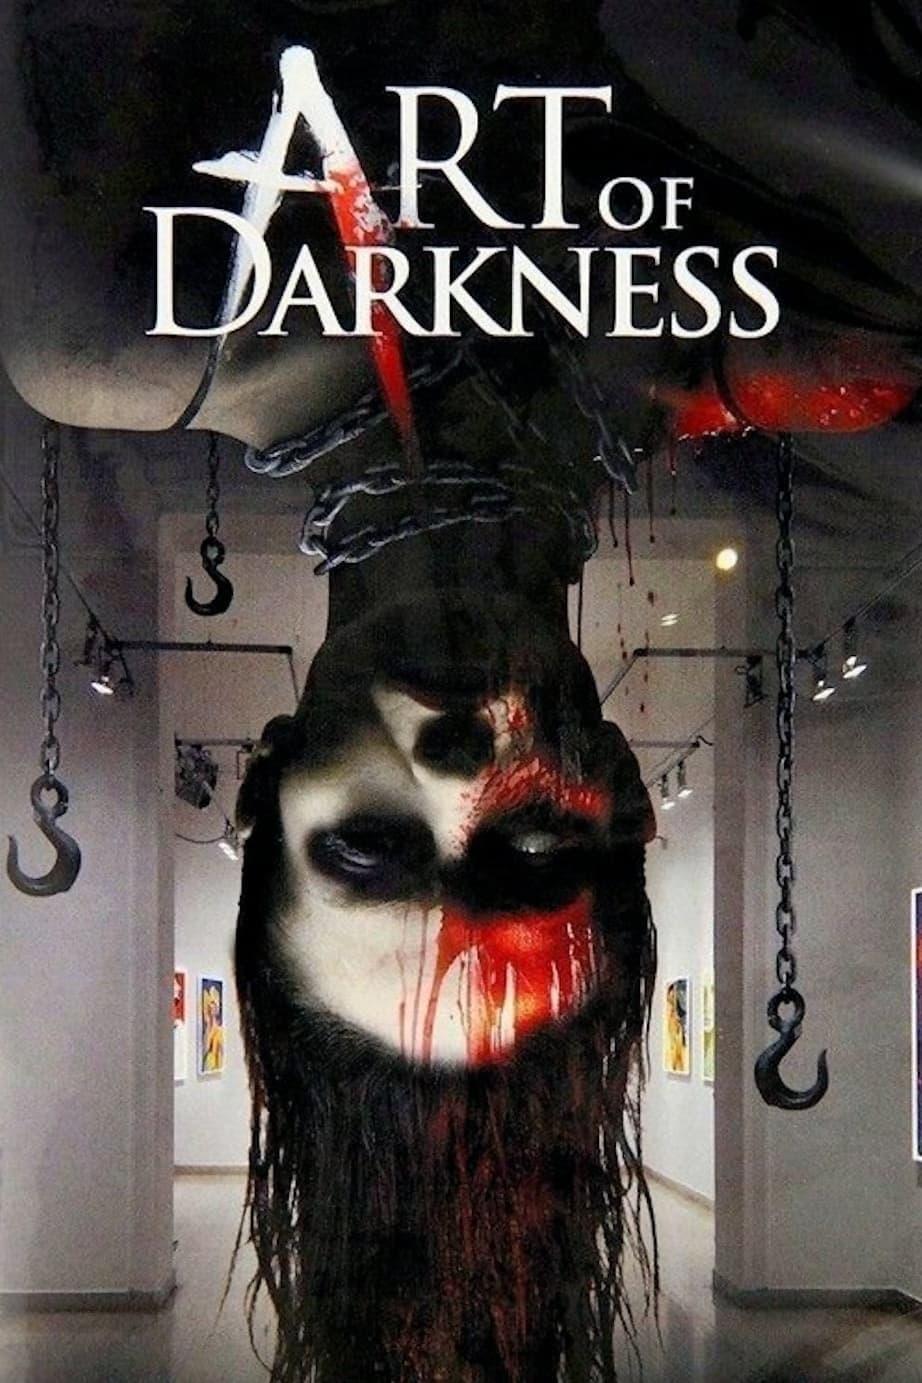 Art of Darkness poster